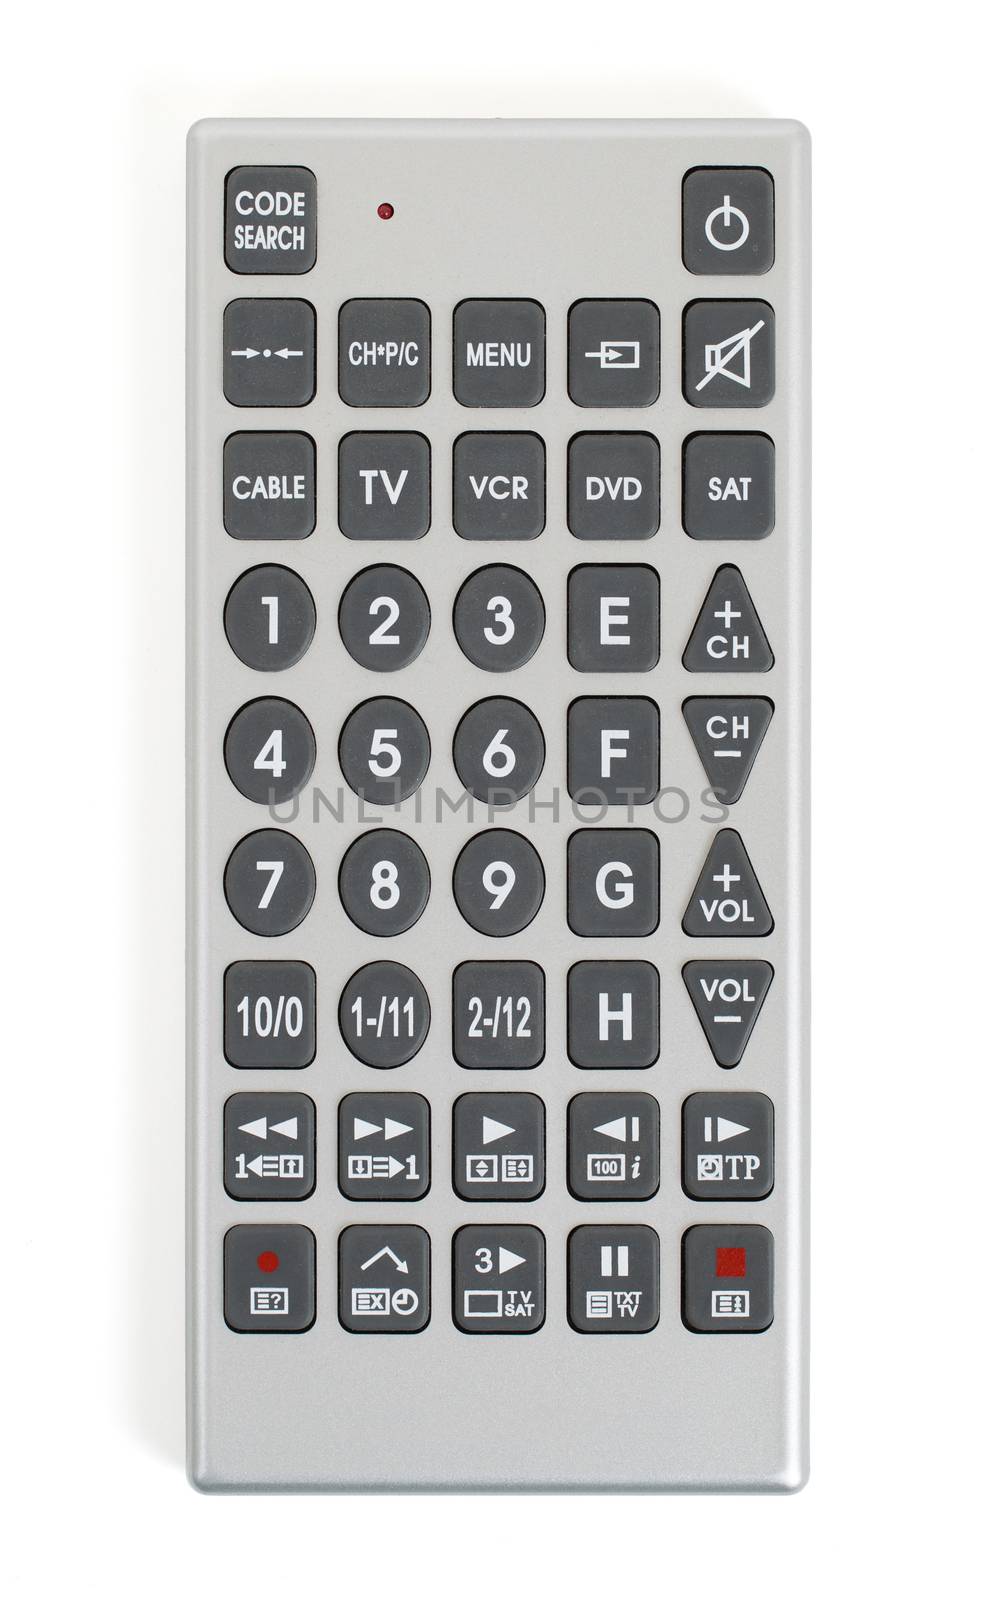 Old remote control tv, isolated on white background